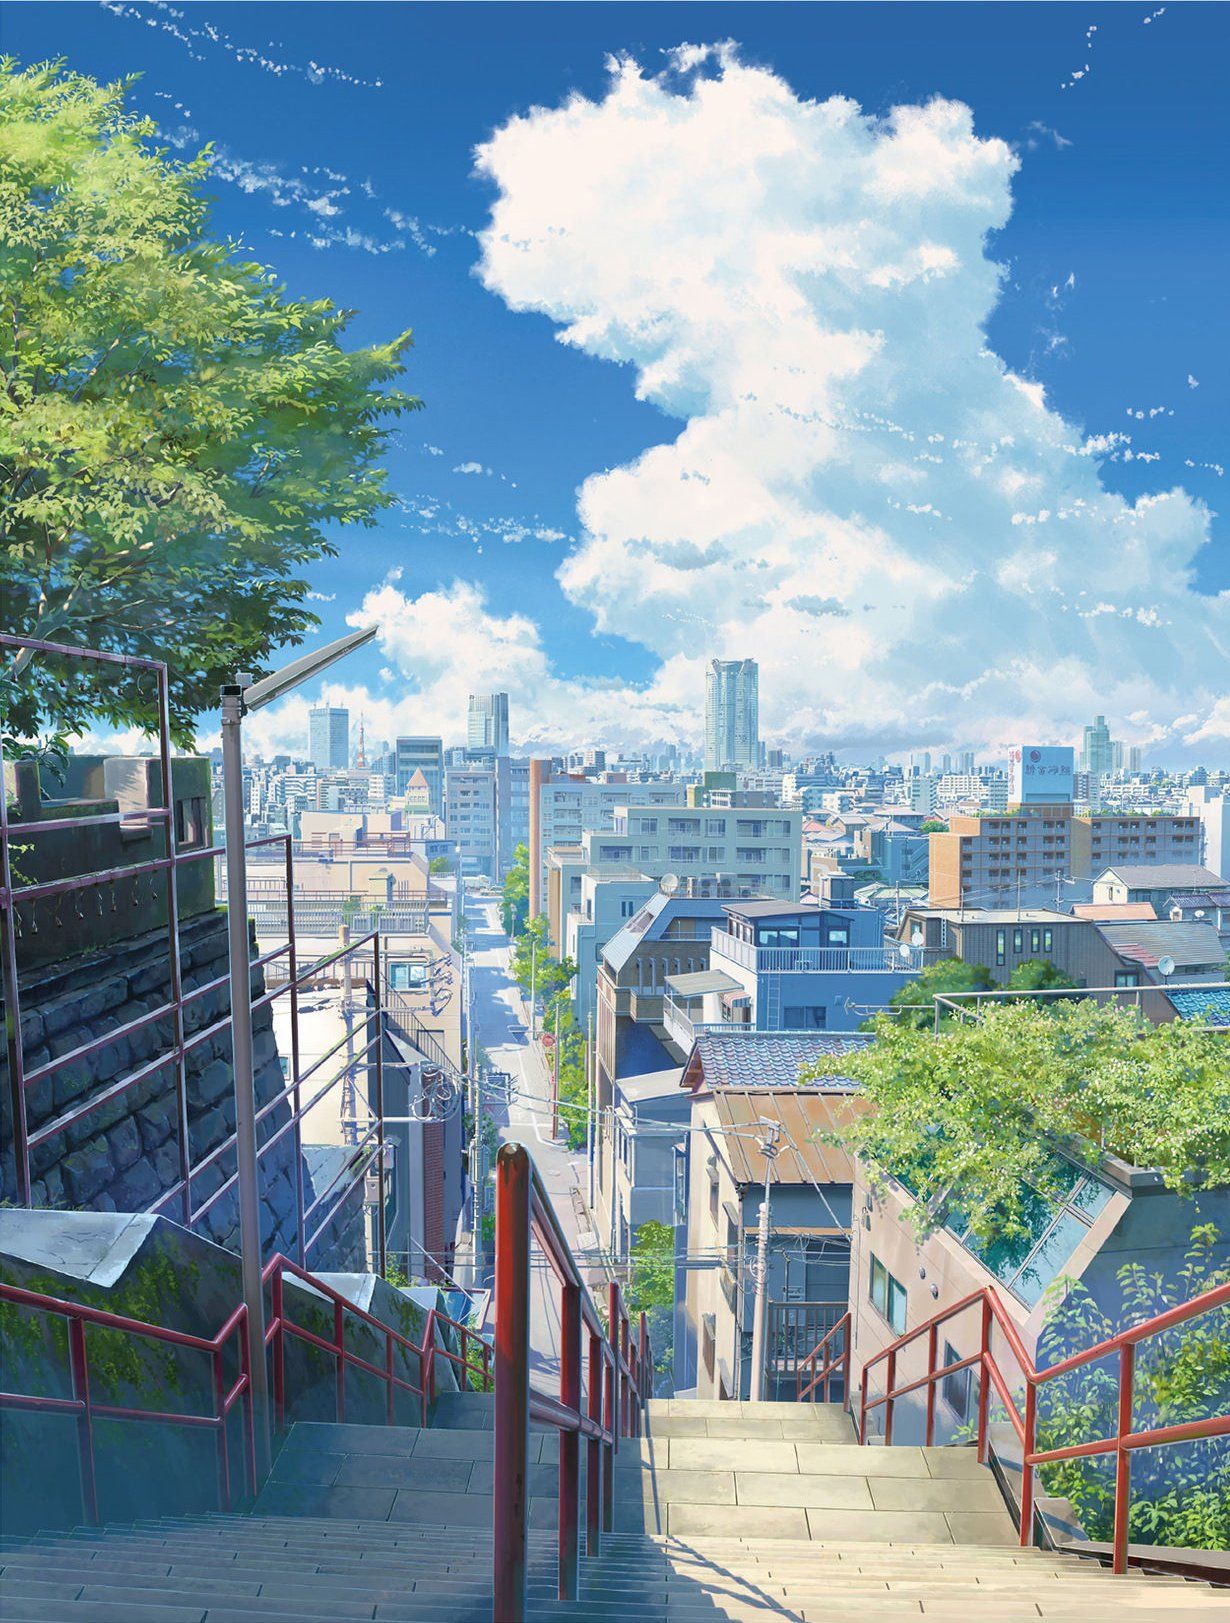 Suga Shrine stair from anime Your Name